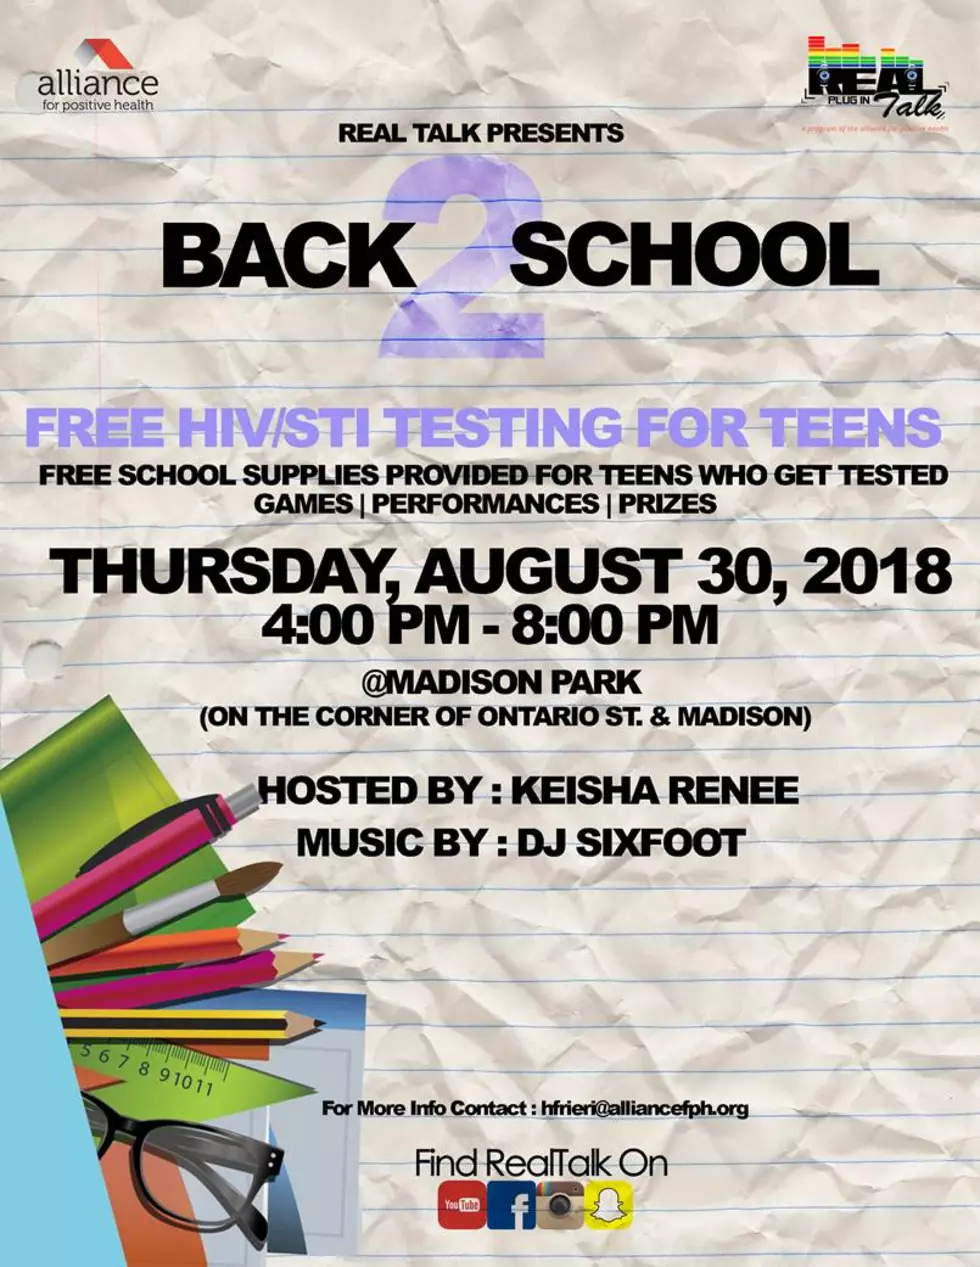 Back 2 School Giveaway and Free HIV Testing Thursday August 30th